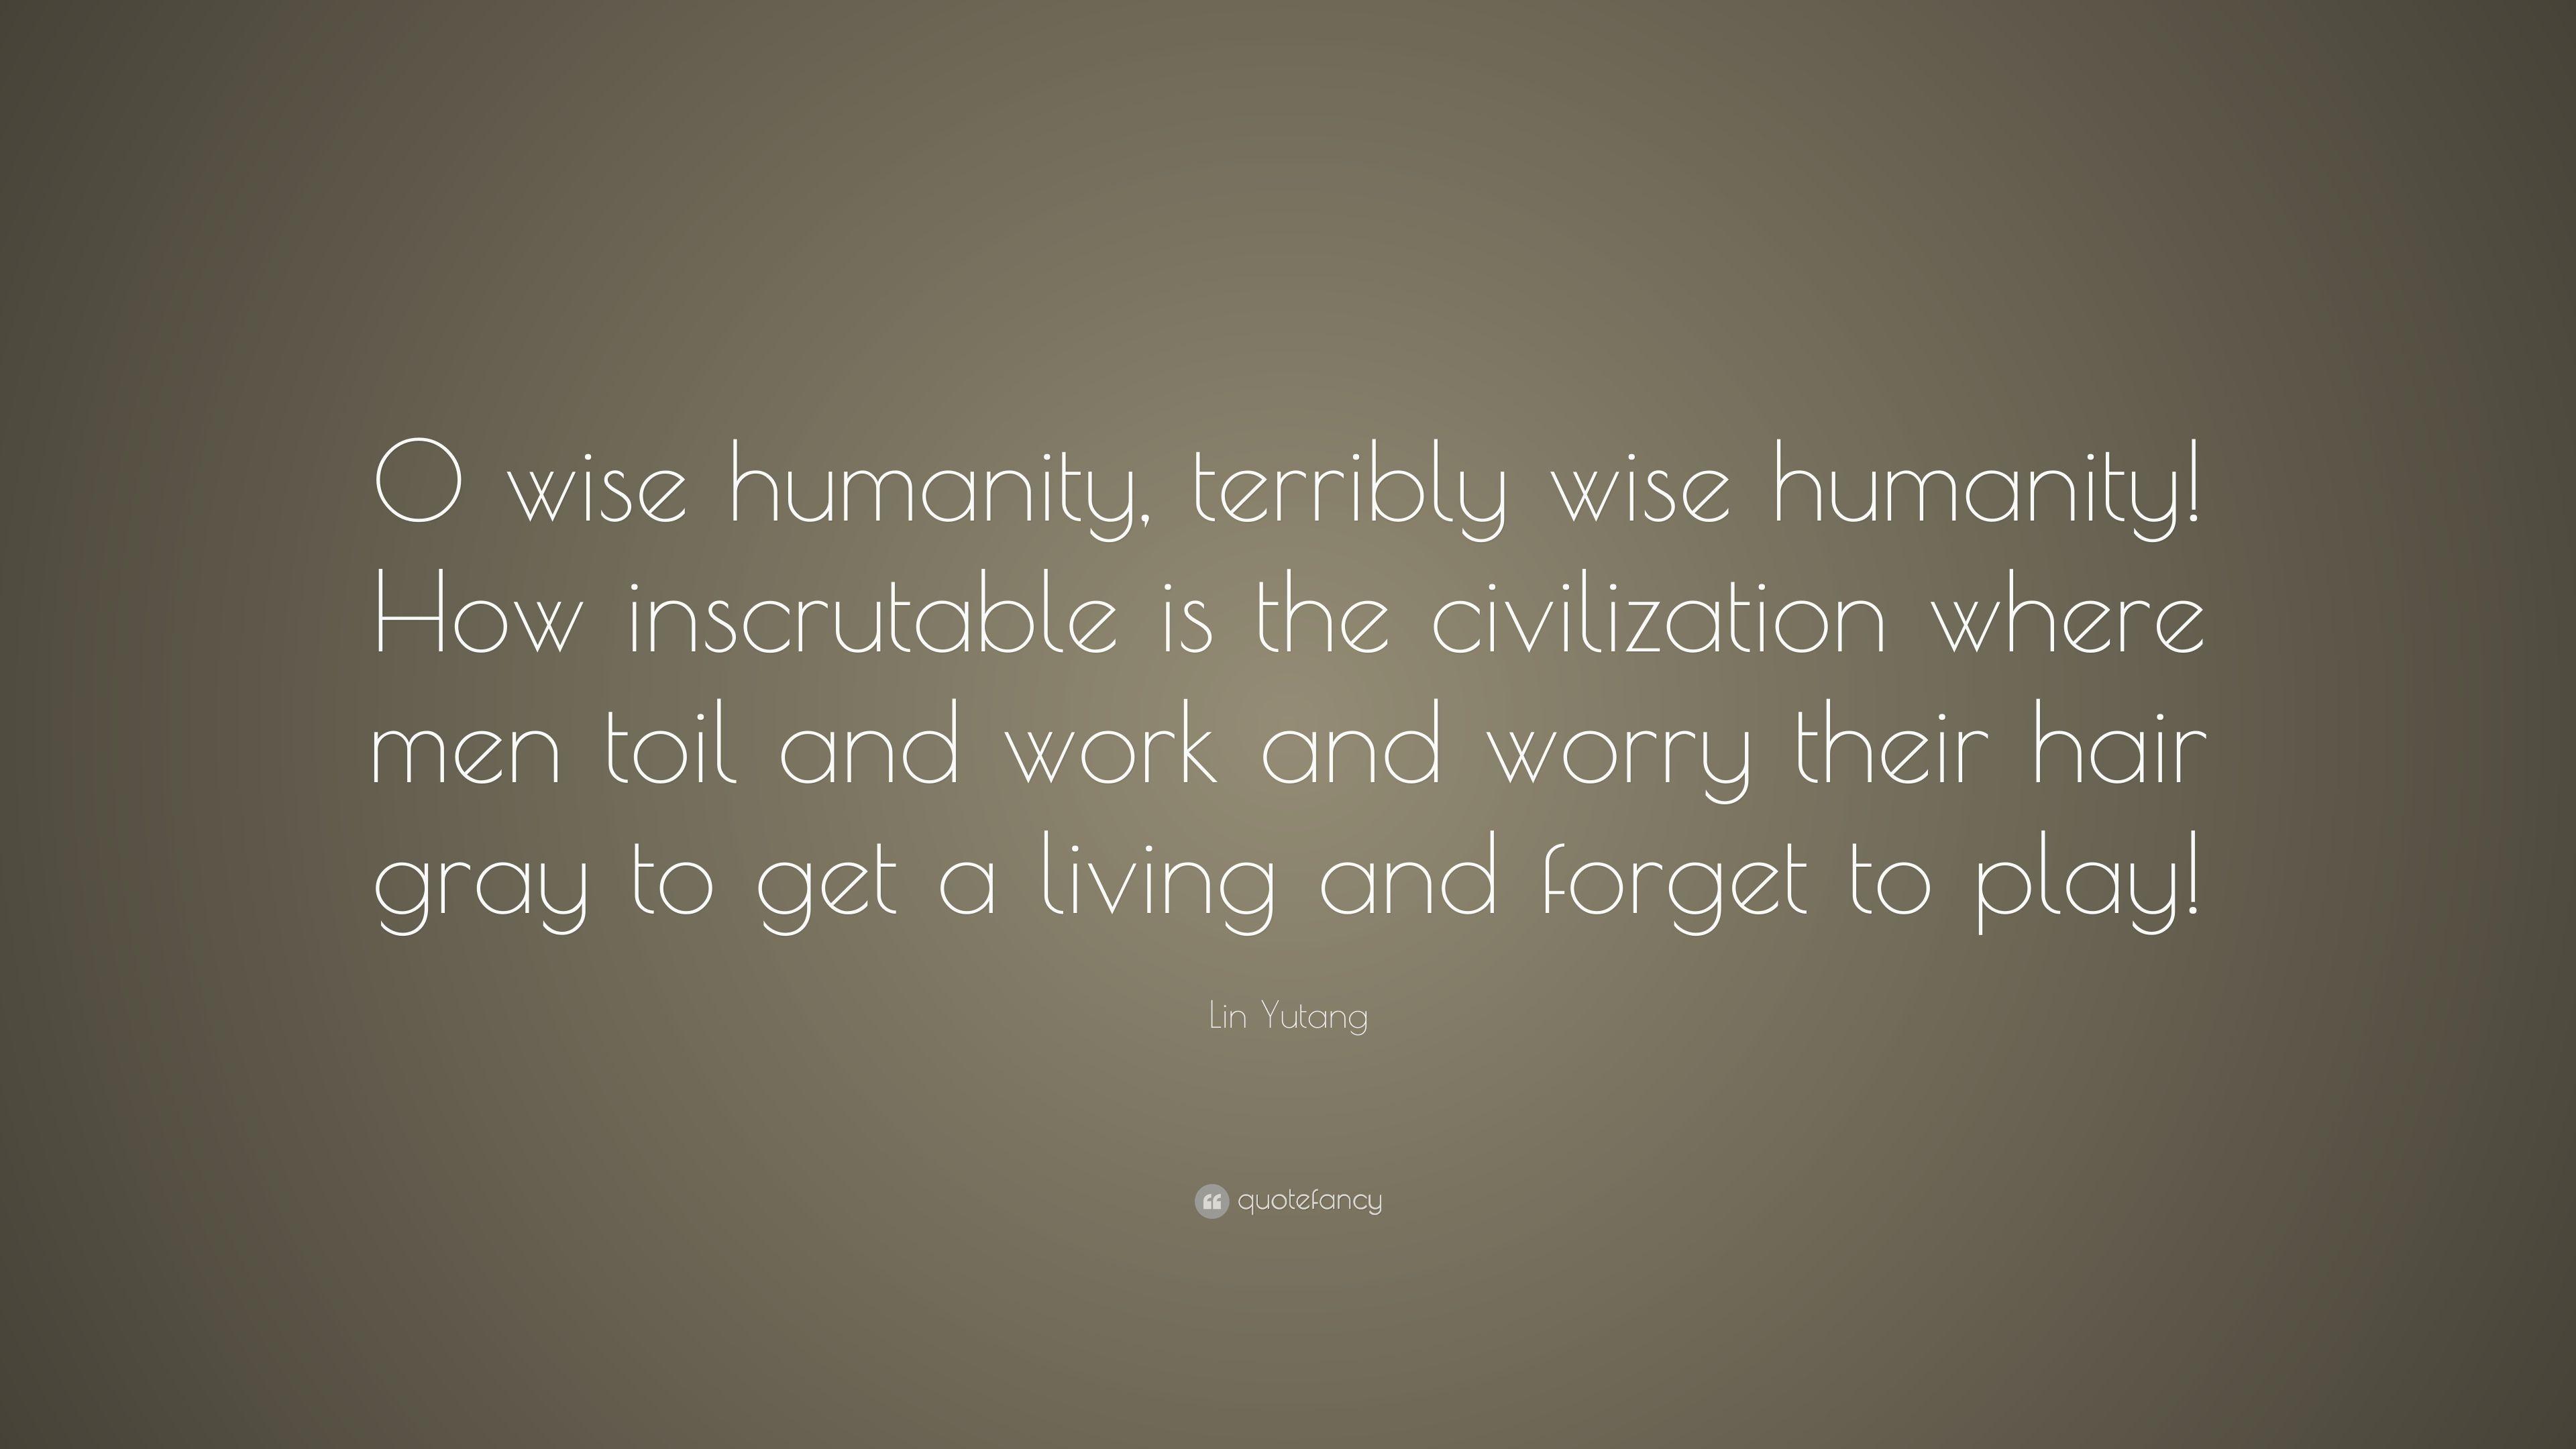 Lin Yutang Quote: “O wise humanity, terribly wise humanity! How